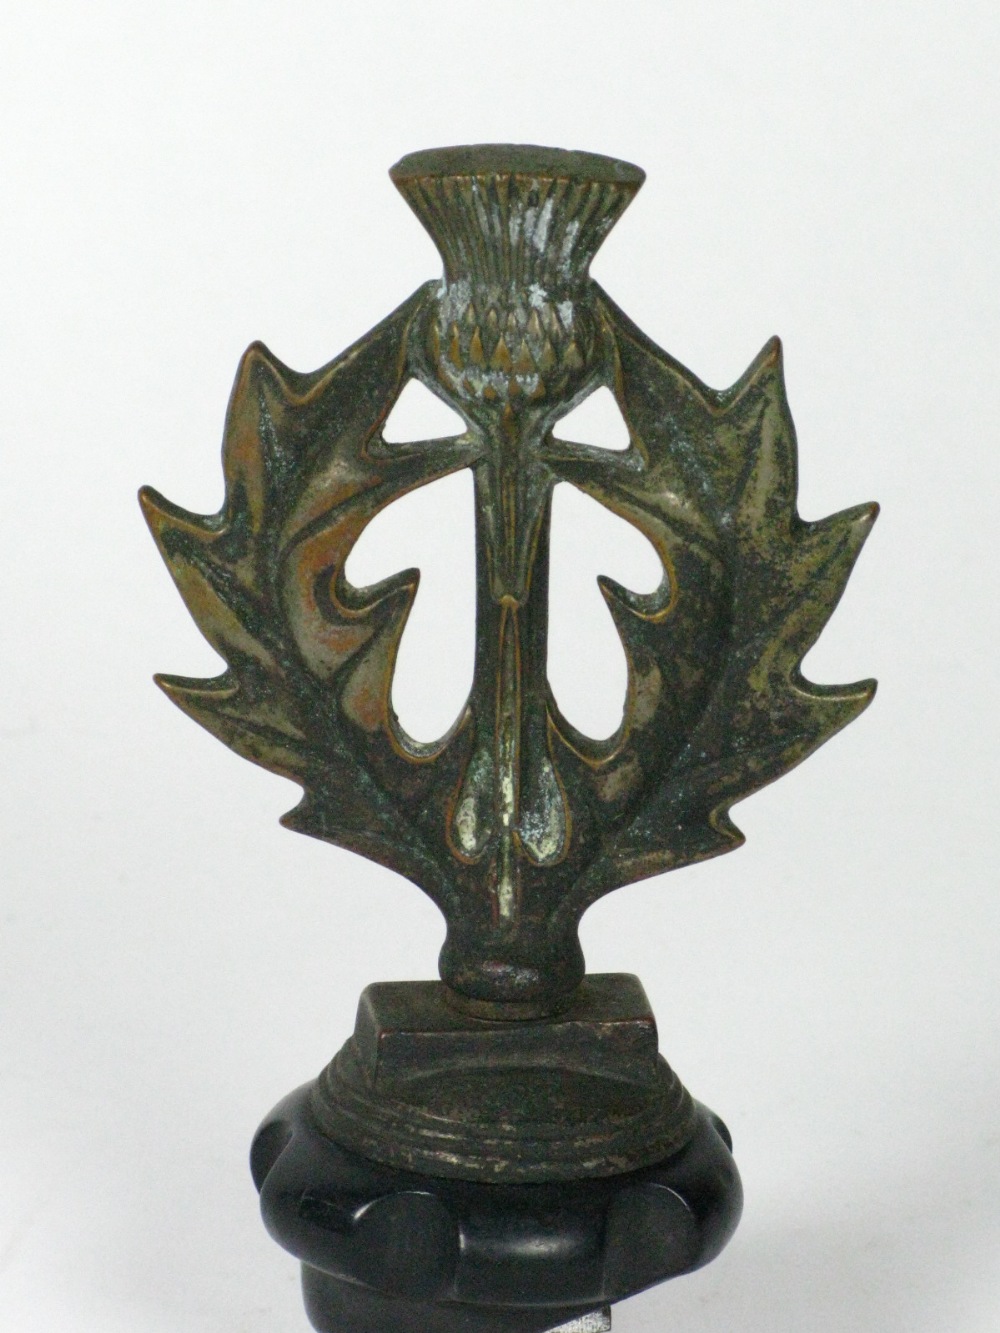 *Thistle Mascot. Probably by Augustine & Emile Lejeune and mounted on a (damaged) small radiator